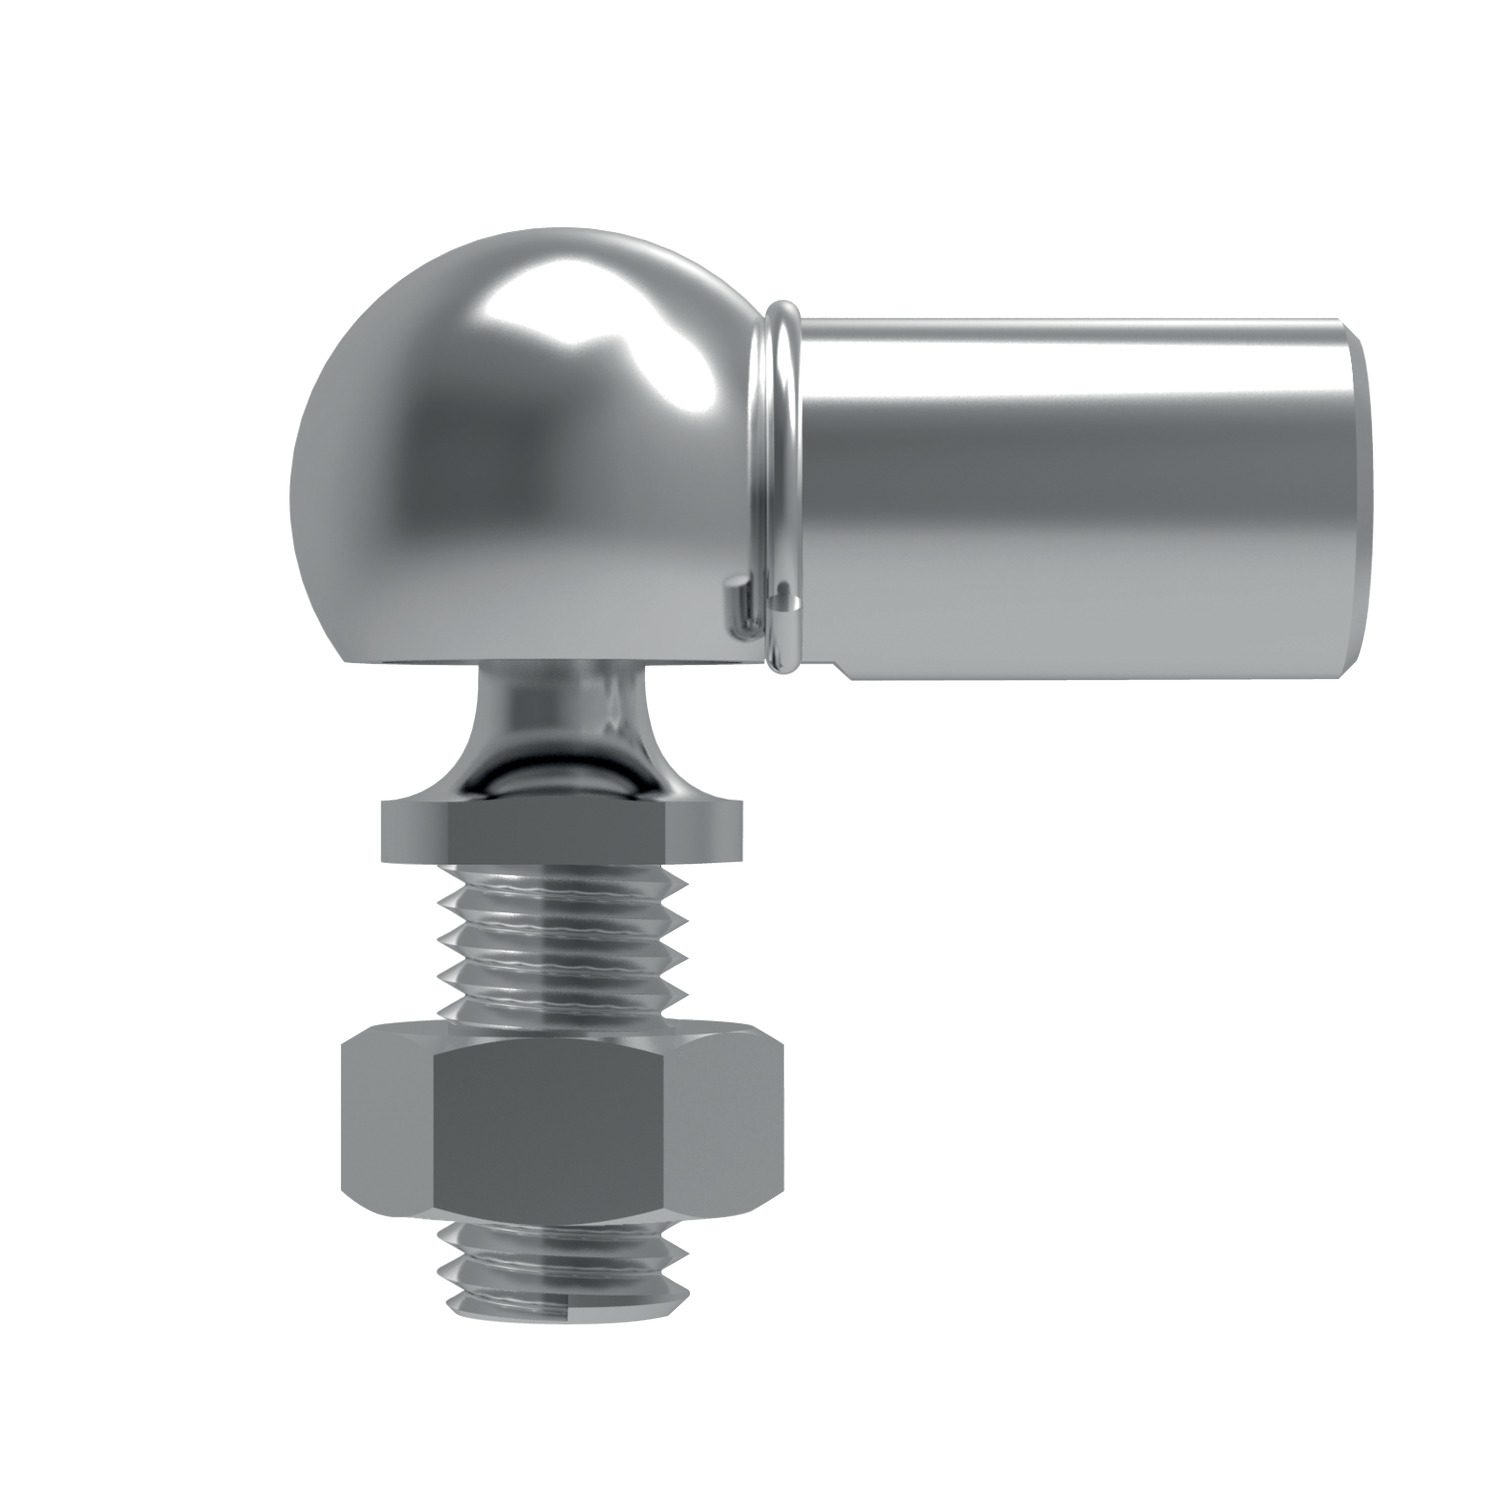 Stainless Ball and Socket Joints Left hand threaded stainless steel ball and socket joint.